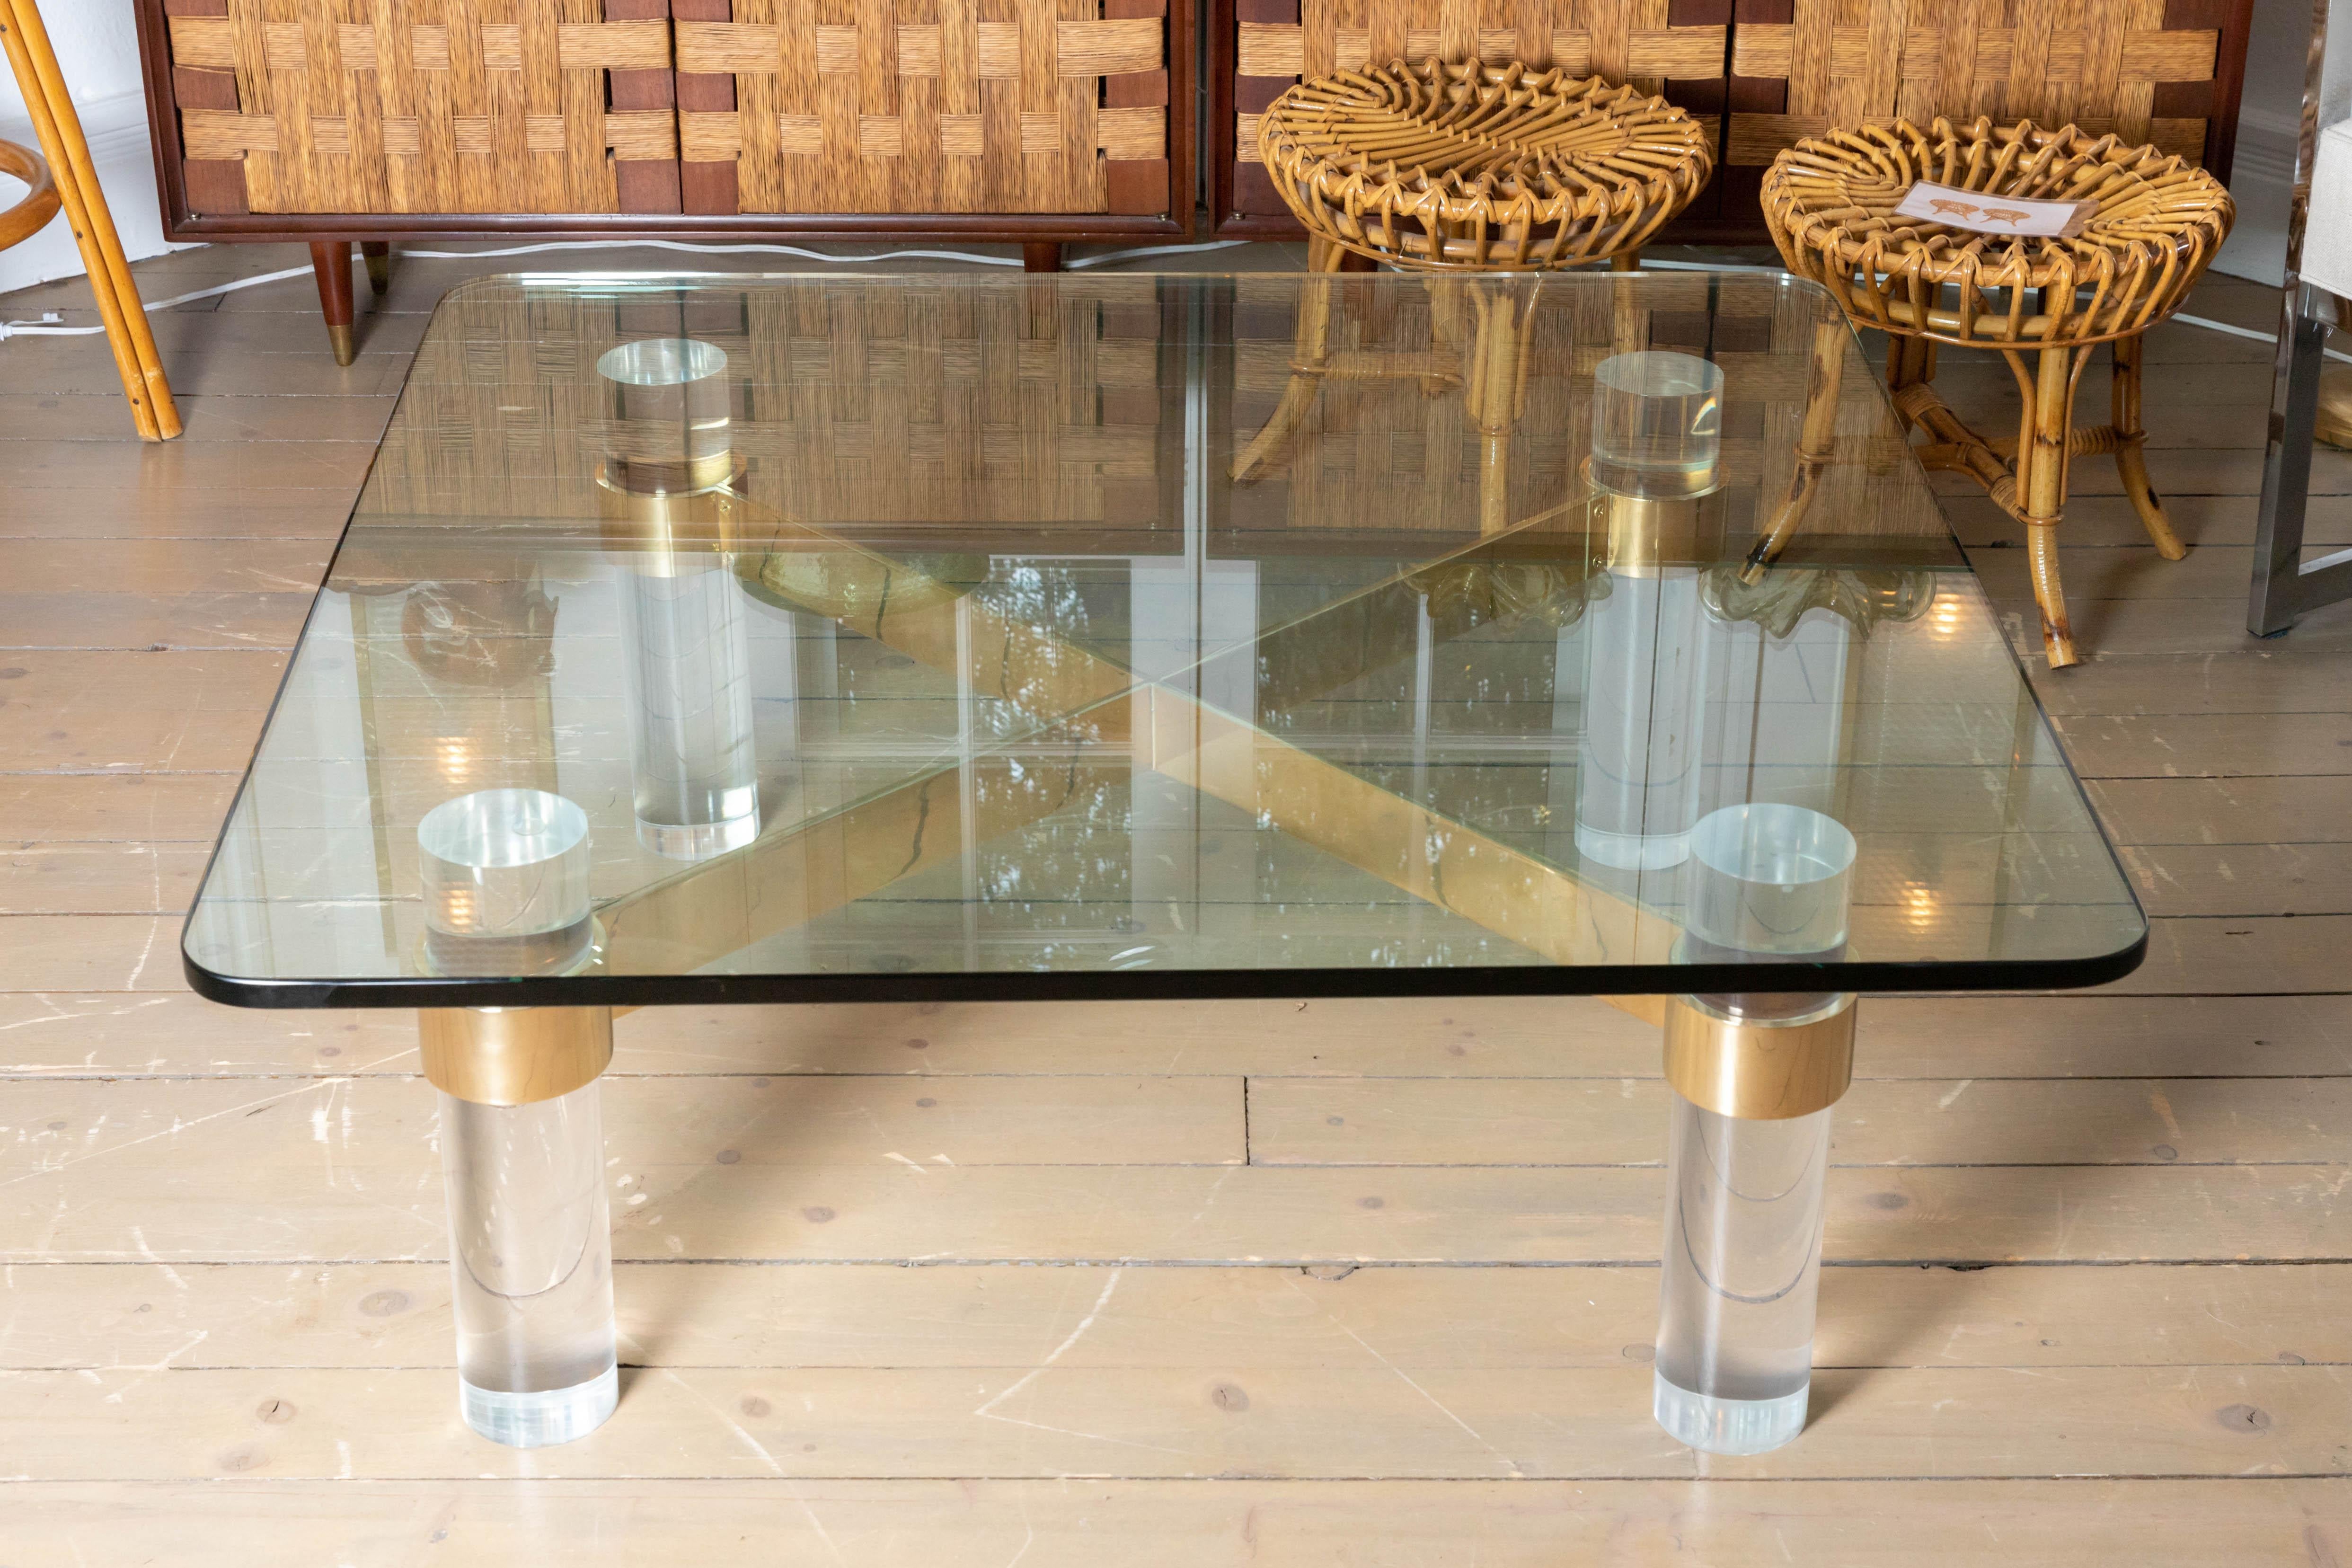 Coffee table with cylindrical Lucite element, cross bars and glass top, by Karl Springer.